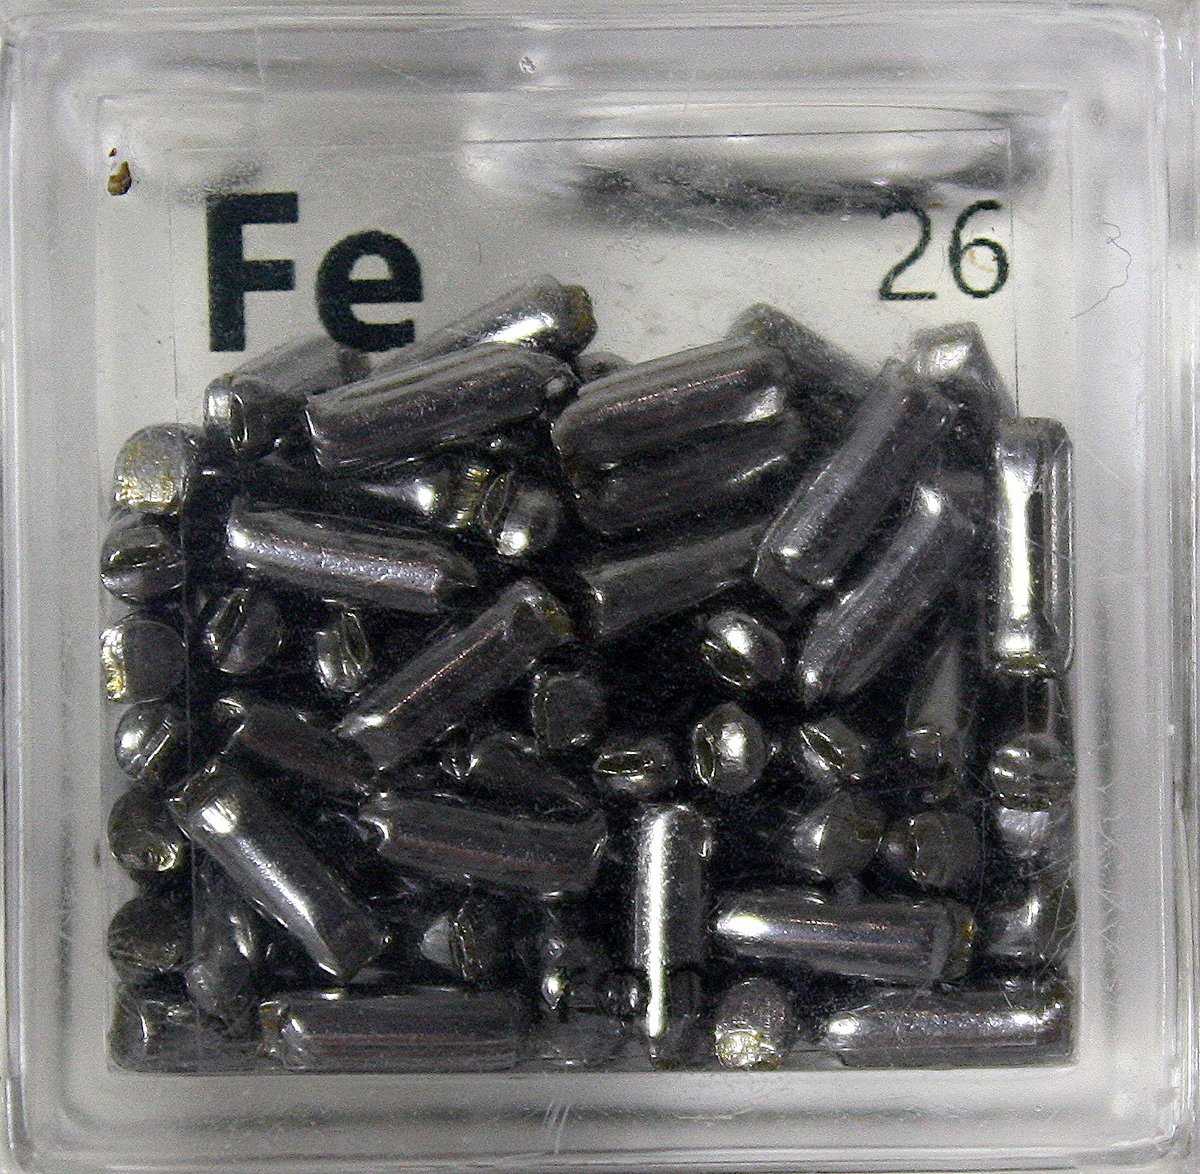 Iron  #elementphotos. Red powder is Hematite (Fe2O3), while the large crystals are Fool's Gold which, as the name suggests, contains no gold (iron pyrites, FeS2).